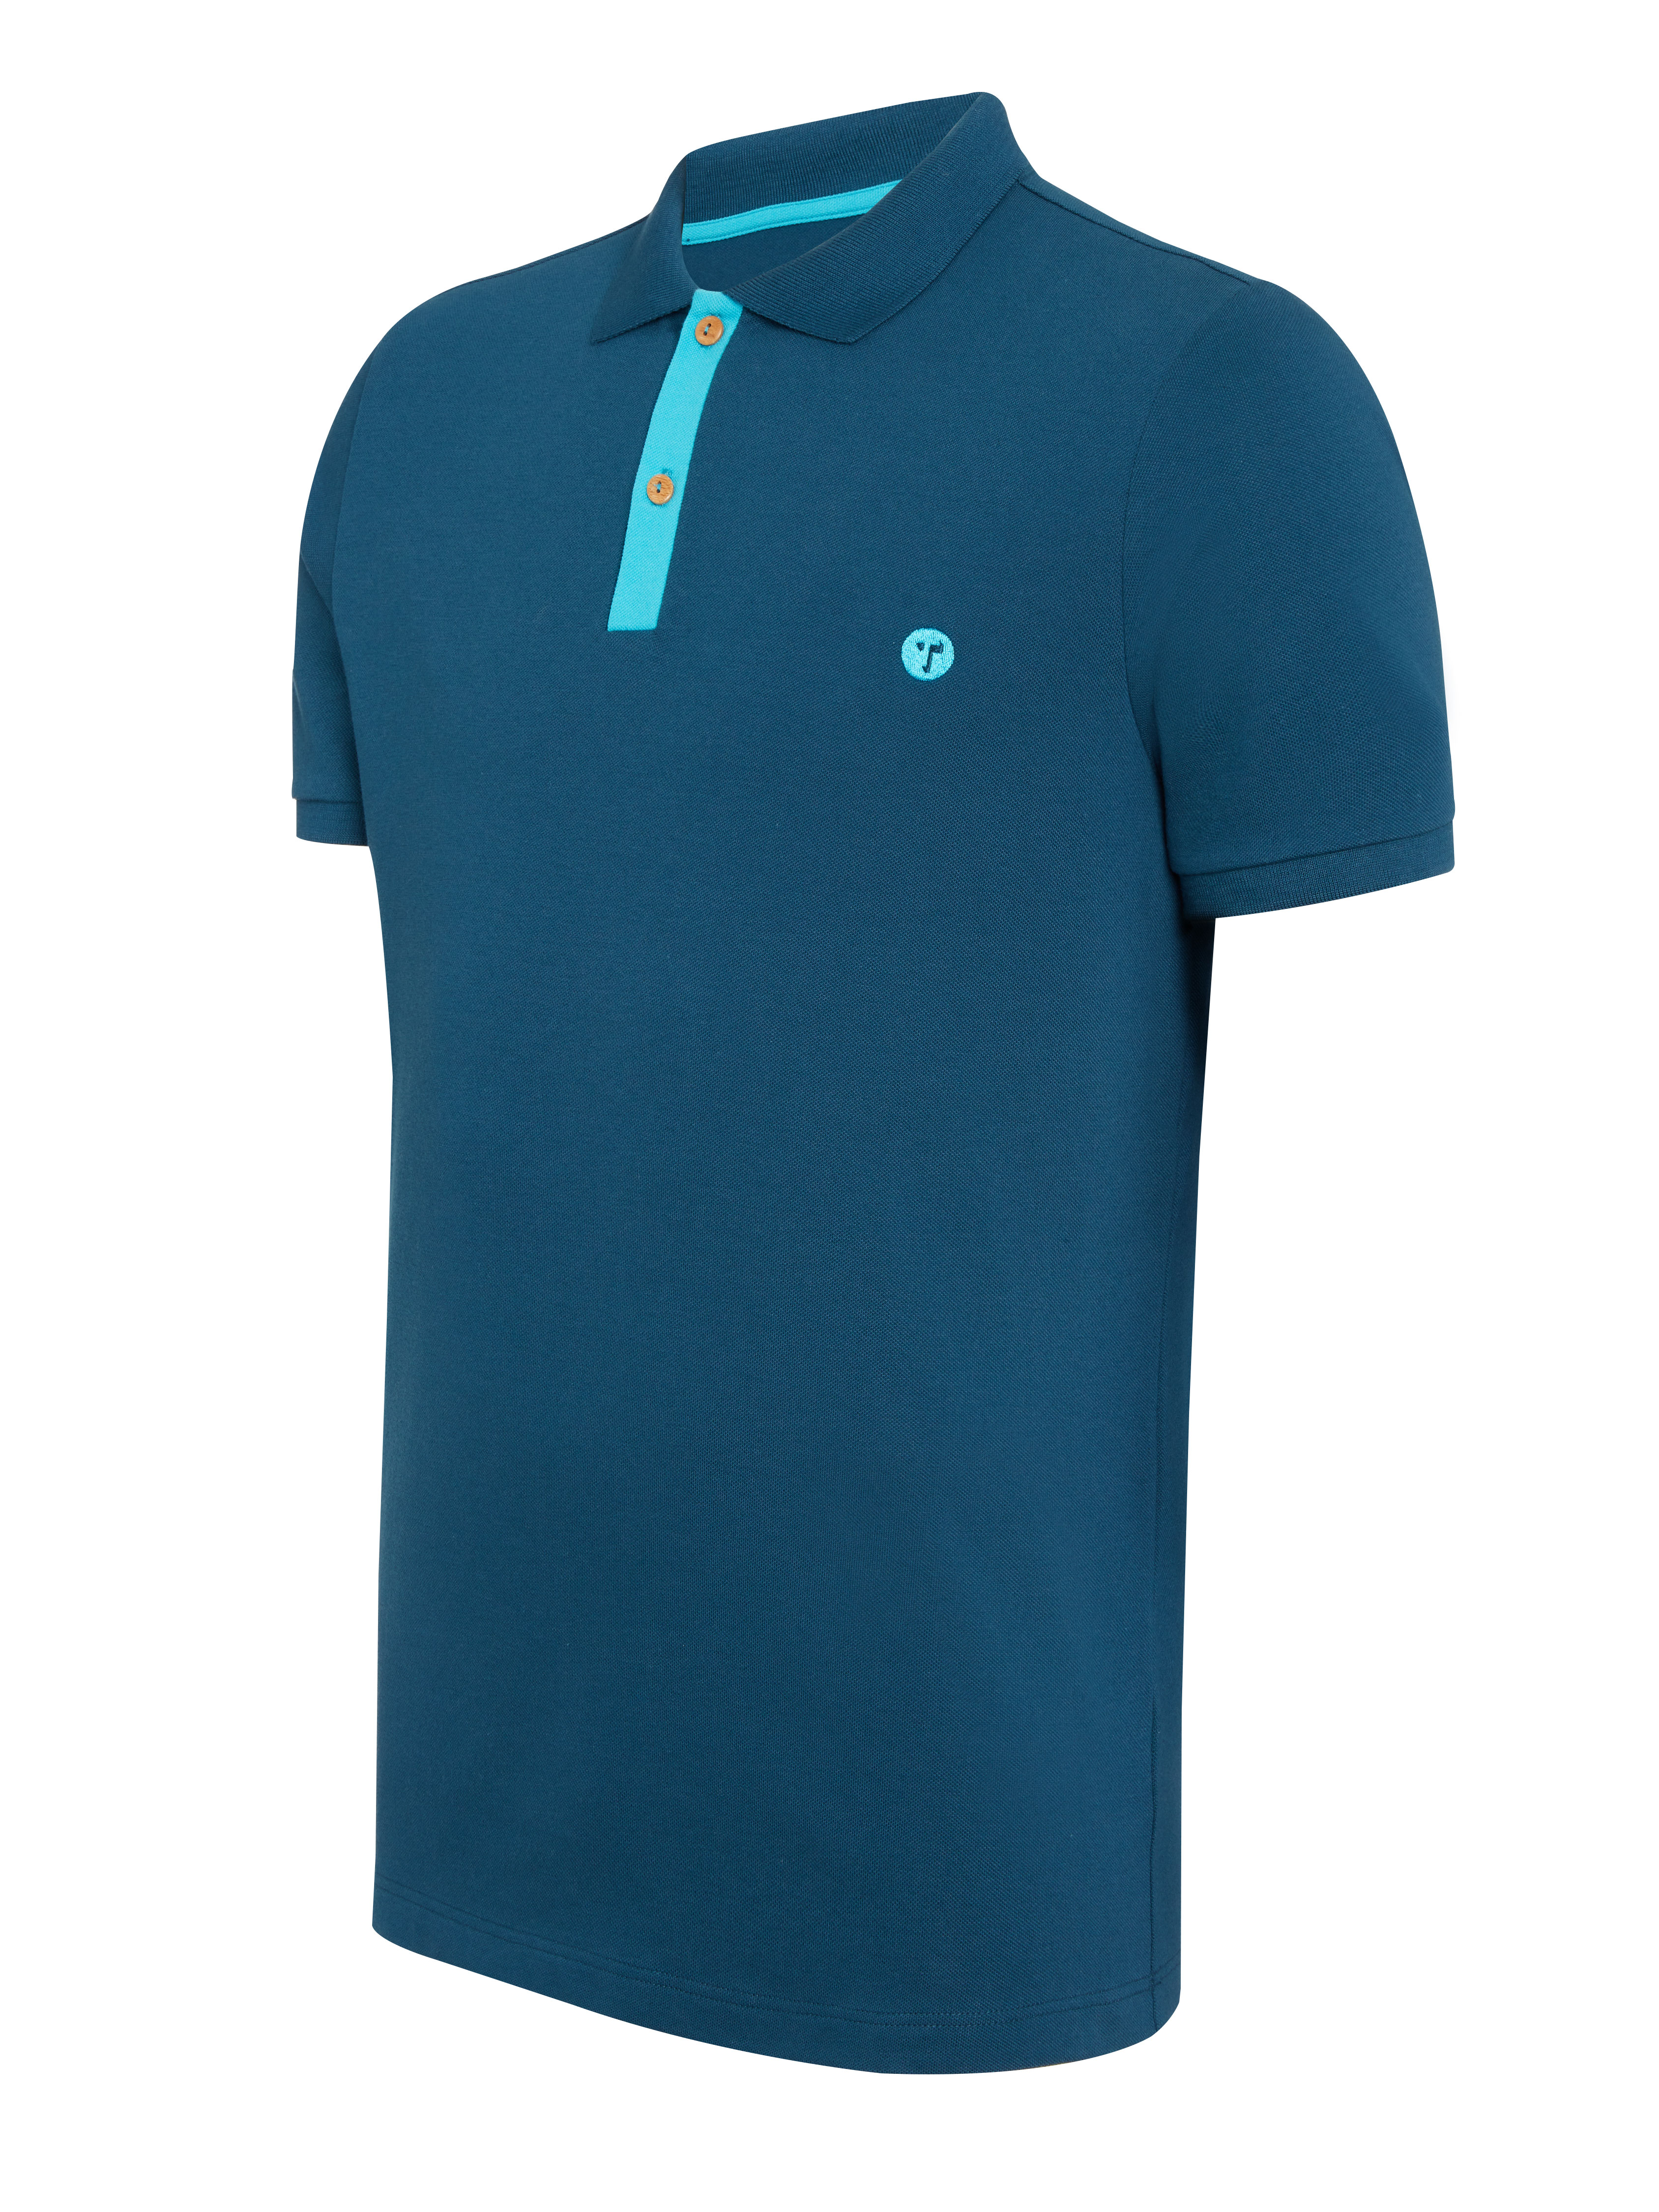 EXCLUSIVE: OCEAN TEE talks new Mako polo shirt and sustainability